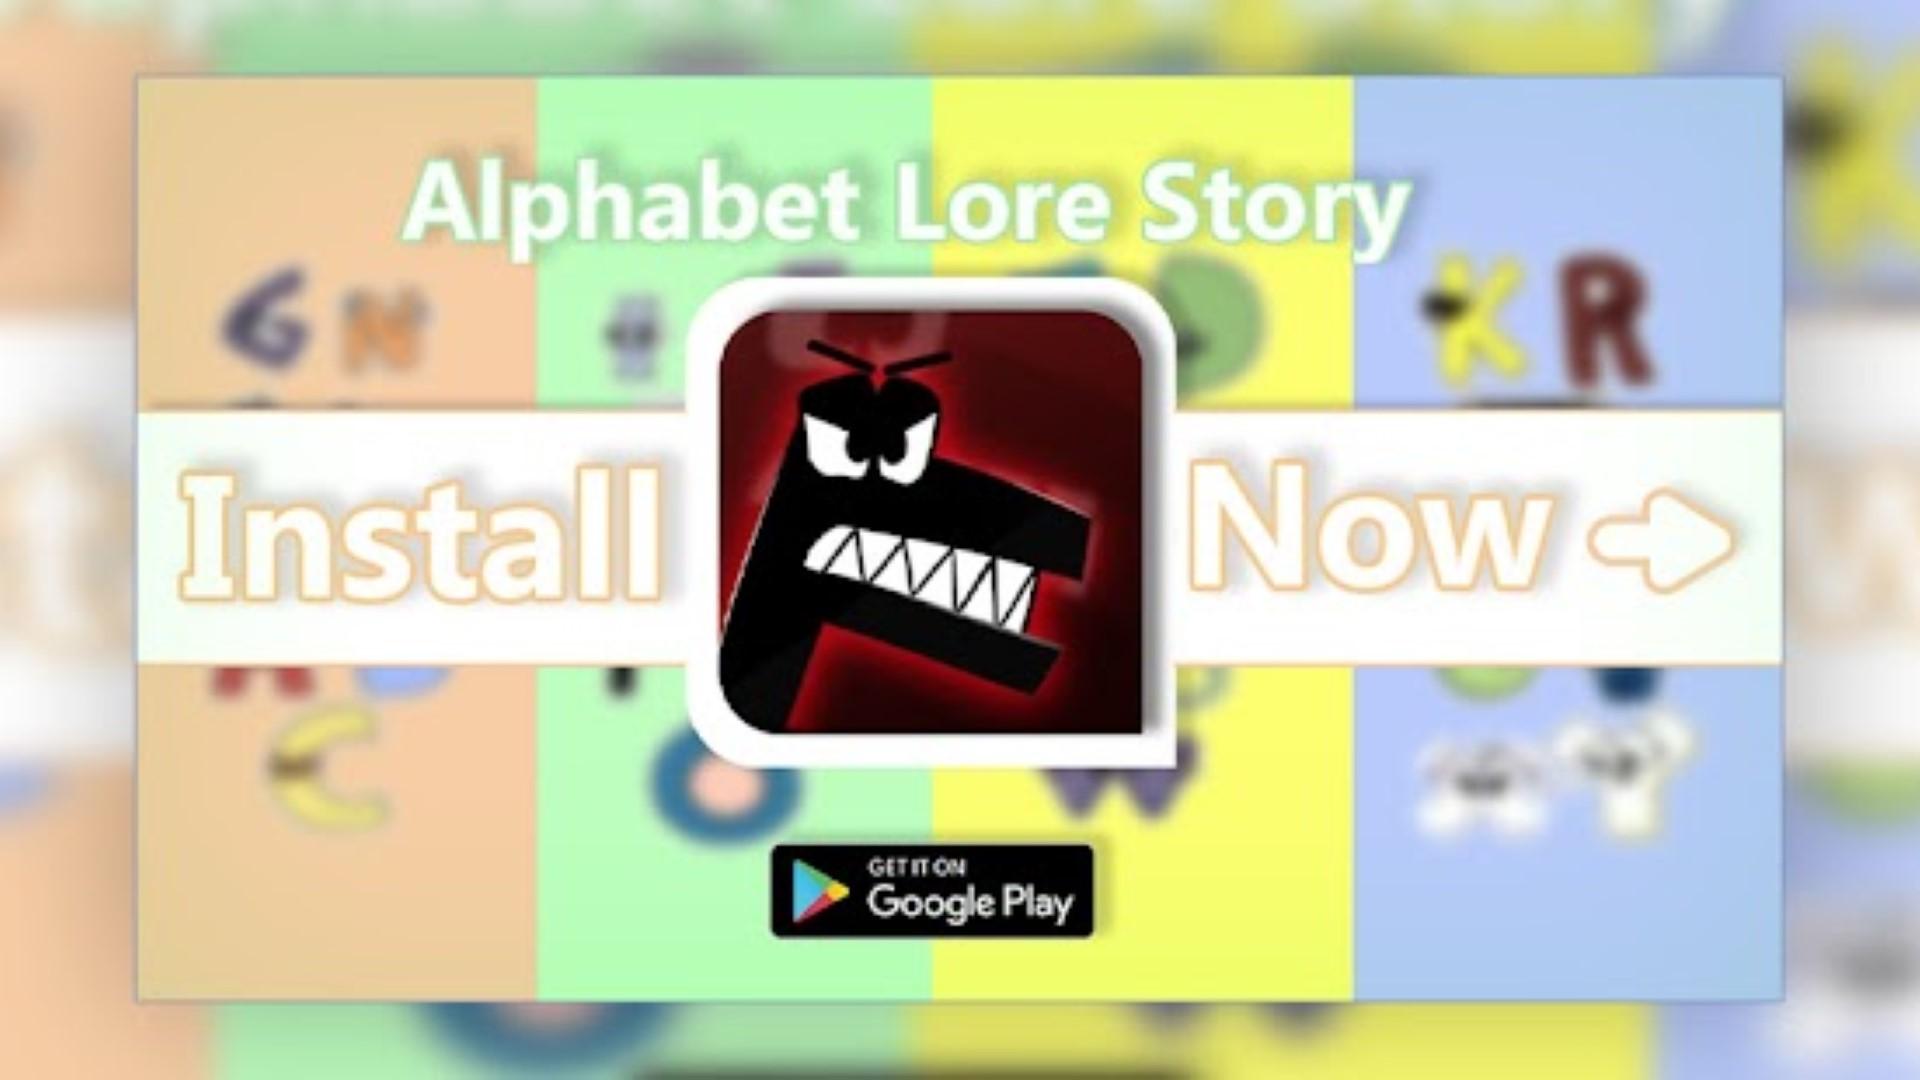 About: The Alphabet Lore : Game (Google Play version)